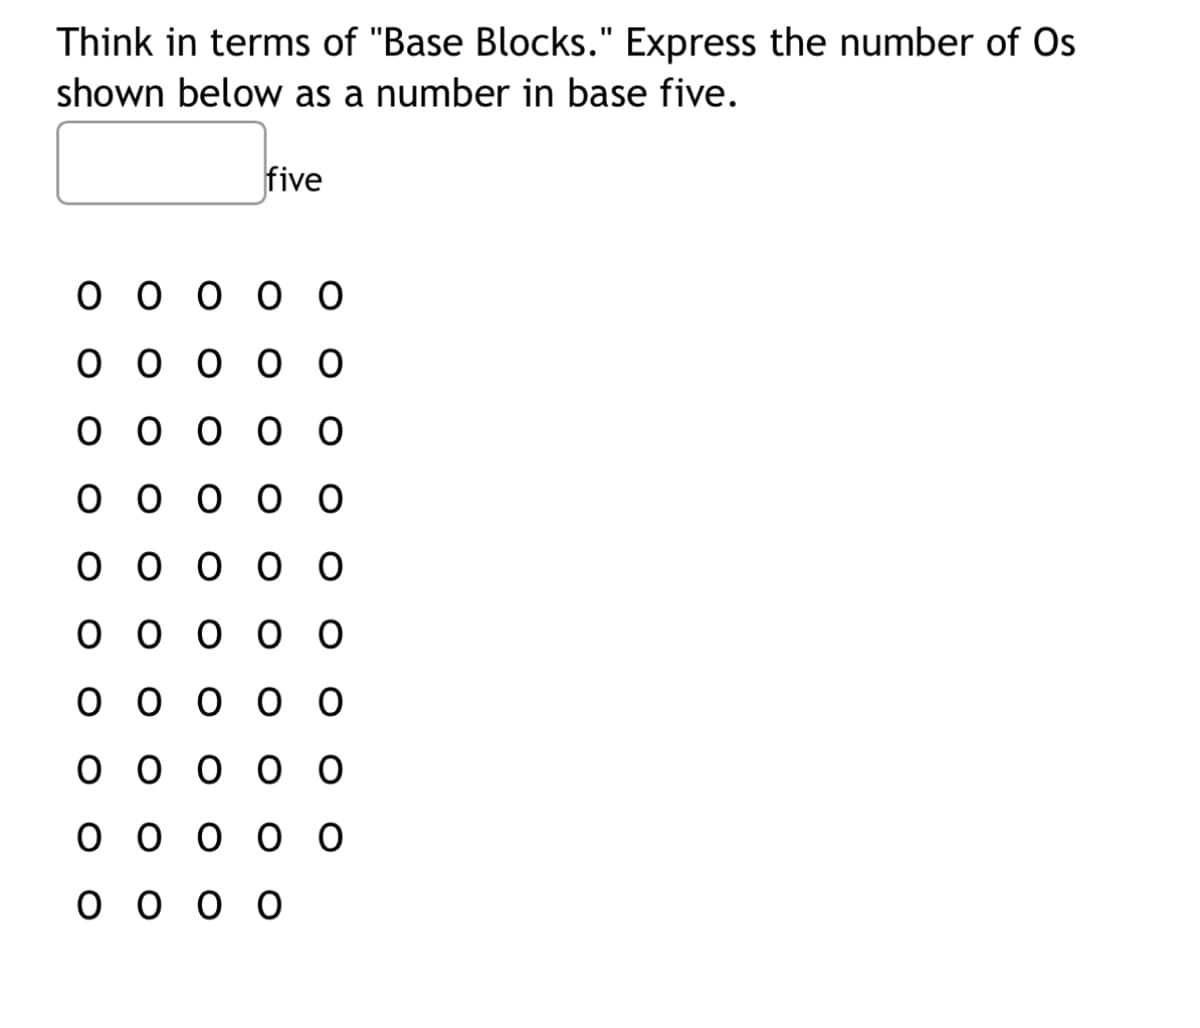 Think in terms of "Base Blocks." Express the number of Os
shown below as a number in base five.
five
ооооо
ооооо
ооооо
ооооо
ооооо
ооооо
ооооо
ооооо
ооооо
оооо